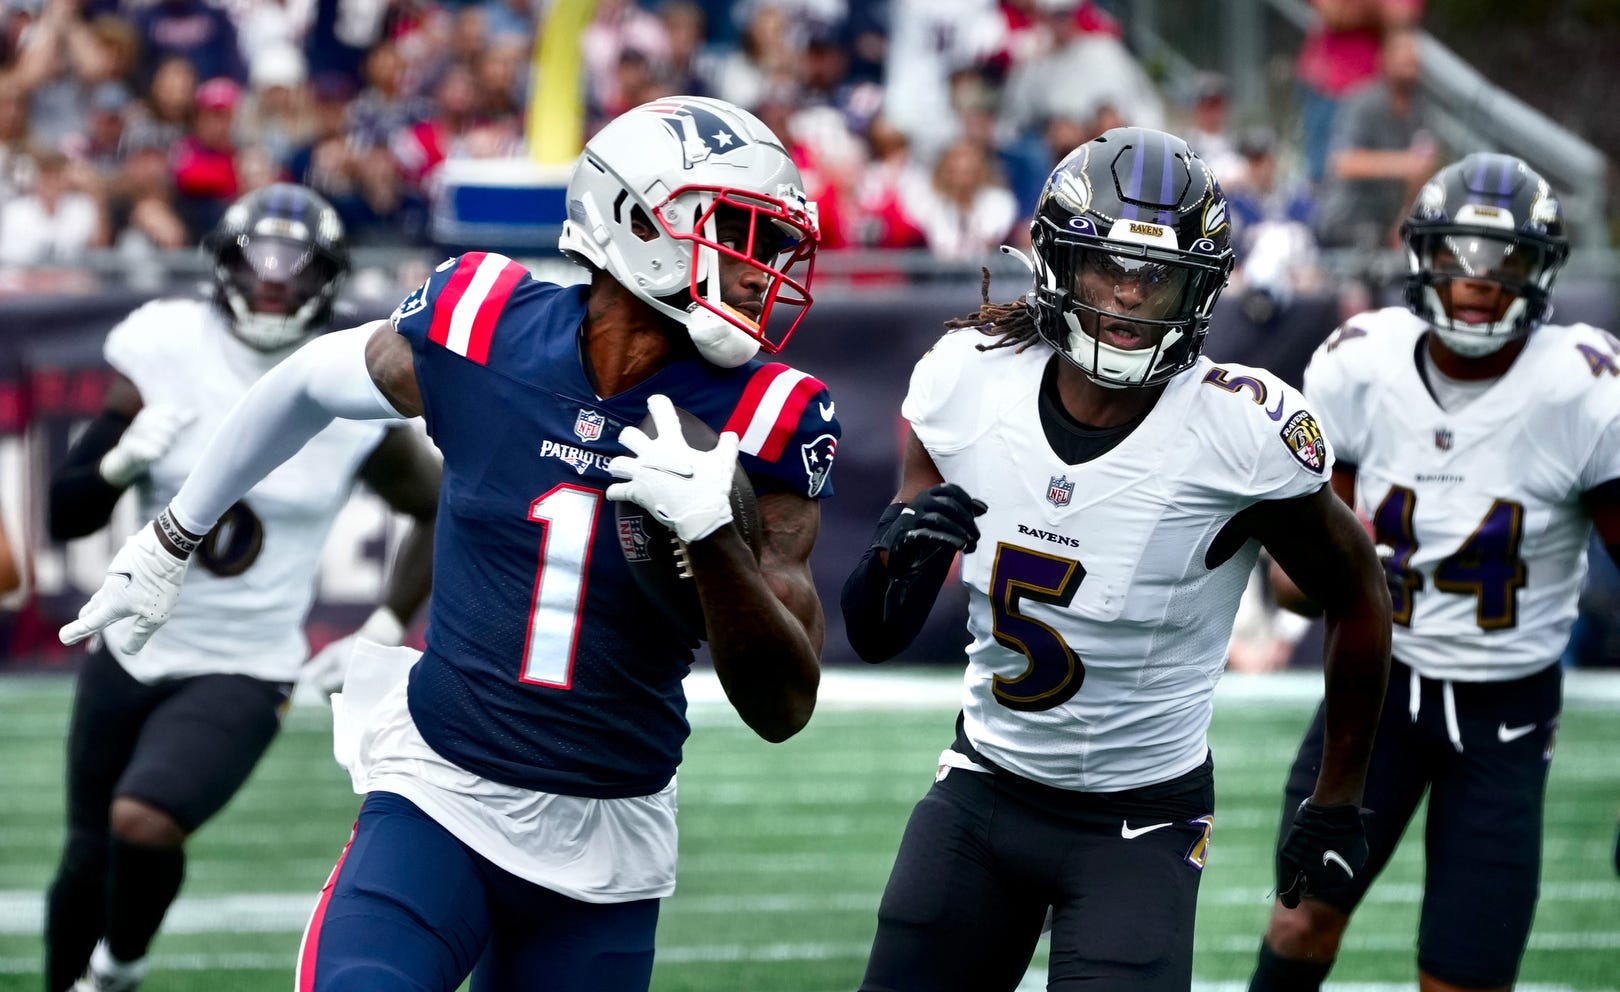 Patriots receiver DeVante Parker looks over his shoulder to Raven defenders in pursuit after a 40yd gain in the first quarter. Patriots home opener against the Baltimore Ravens on Sept 25, 2022.